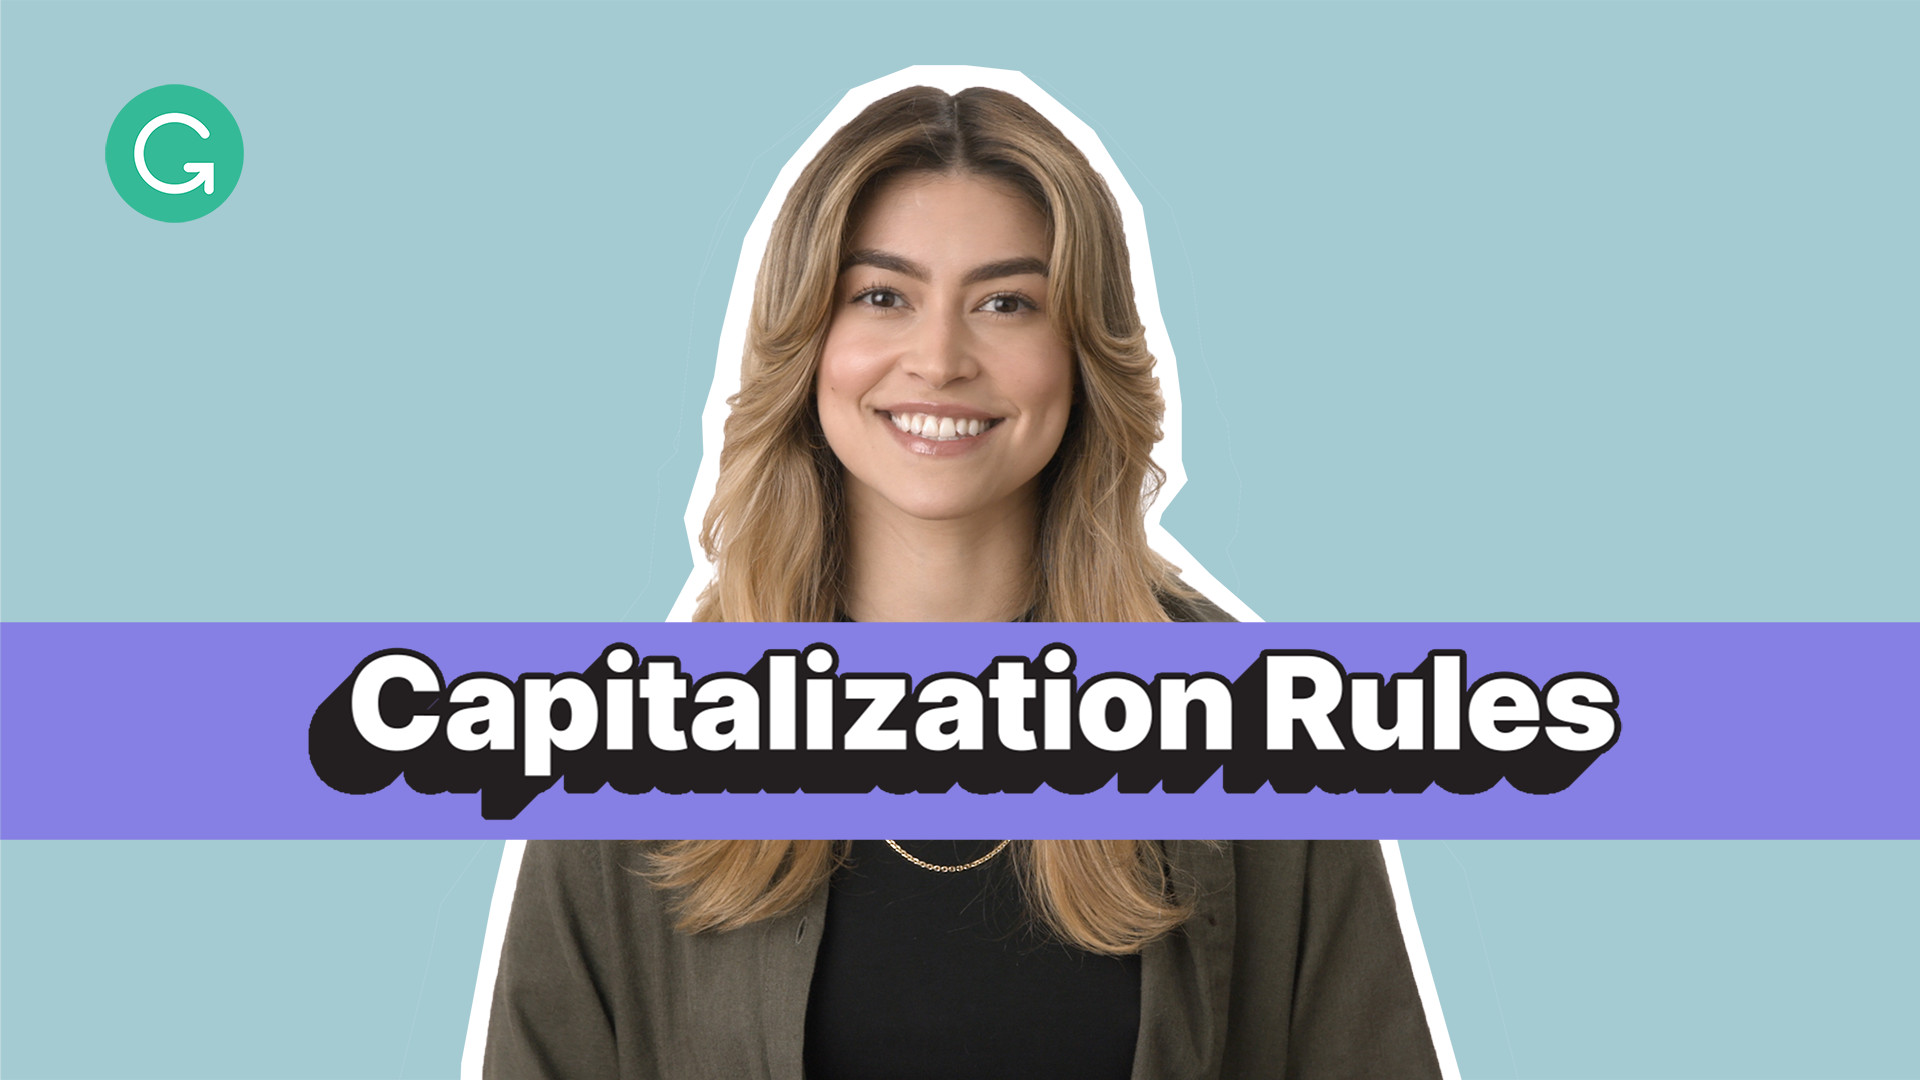 Play Video - Capitalization Rules